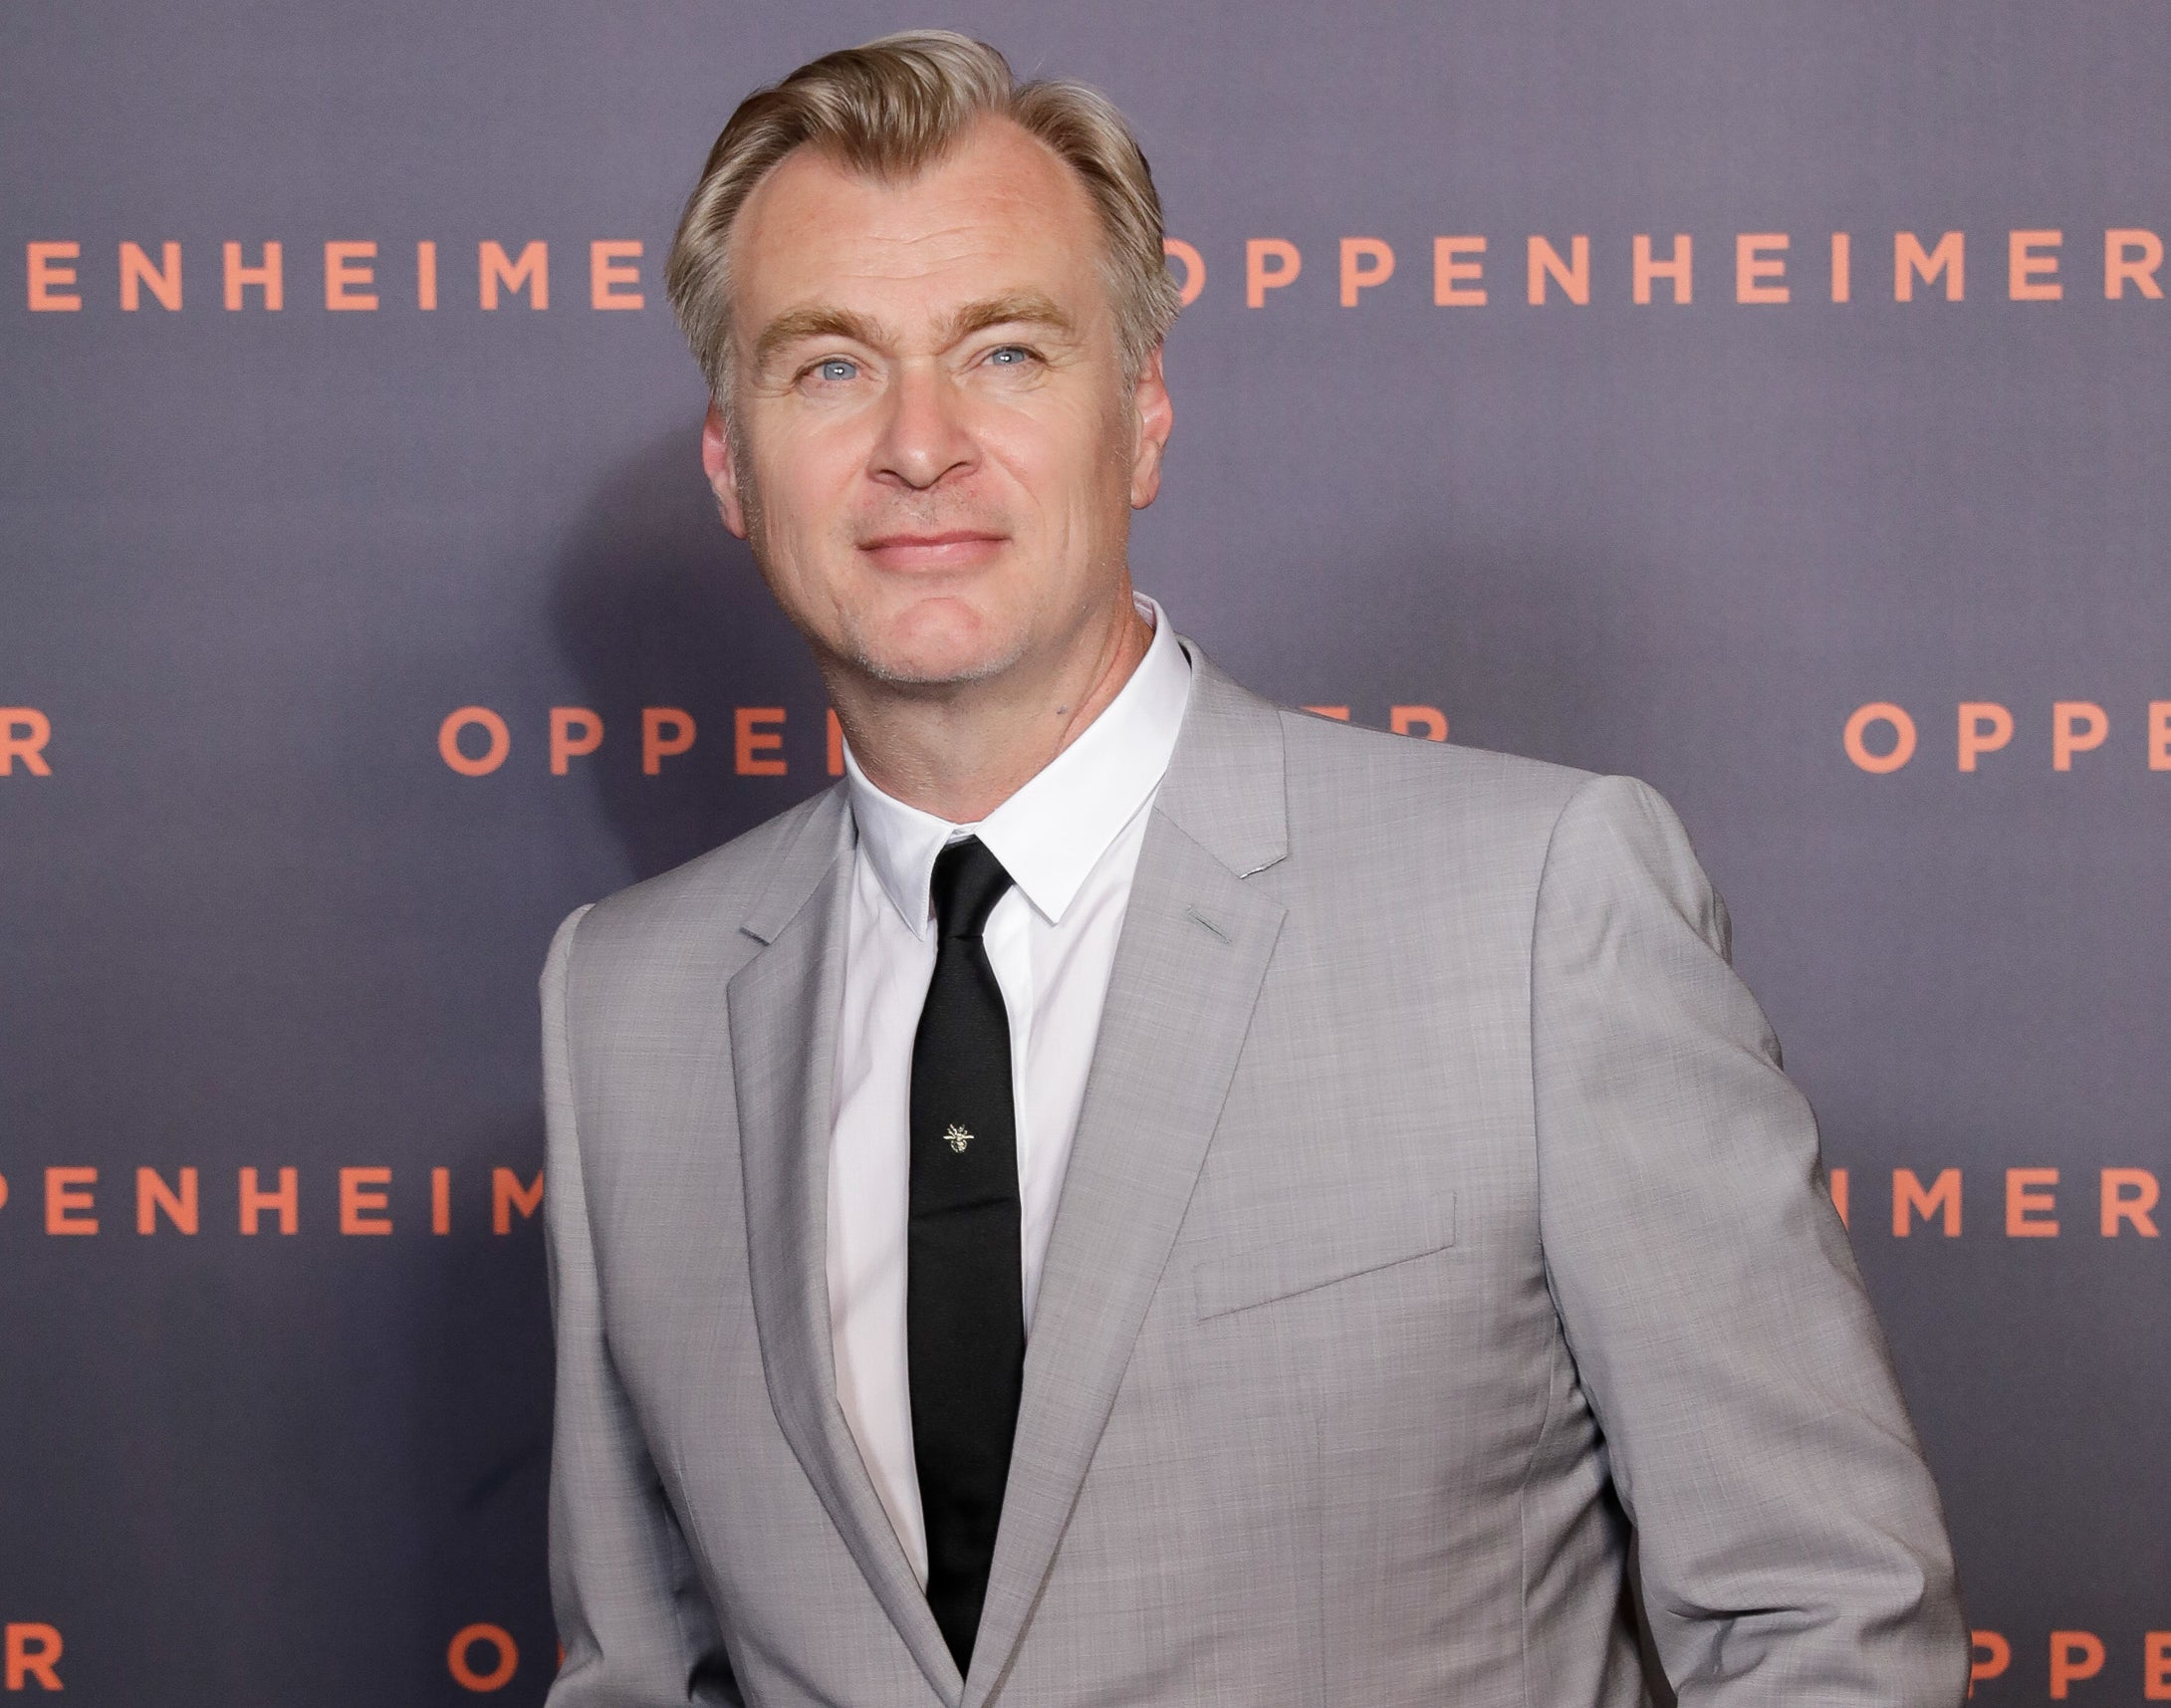 A close-up of Christopher in suit and tie at a media event